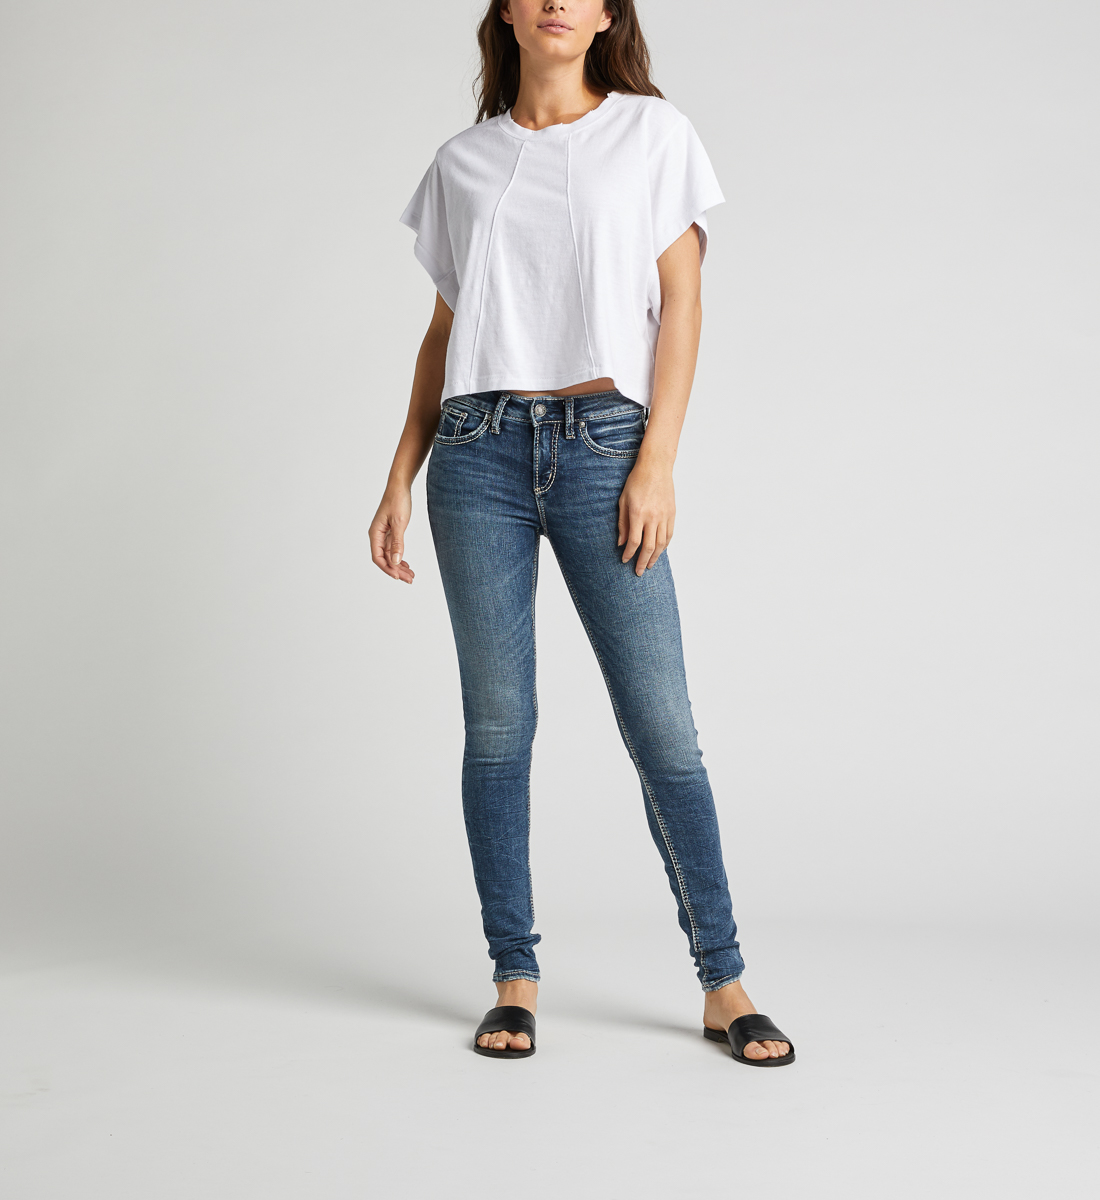 Silver Jeans Avery High Rise Skinny Leg Jeans